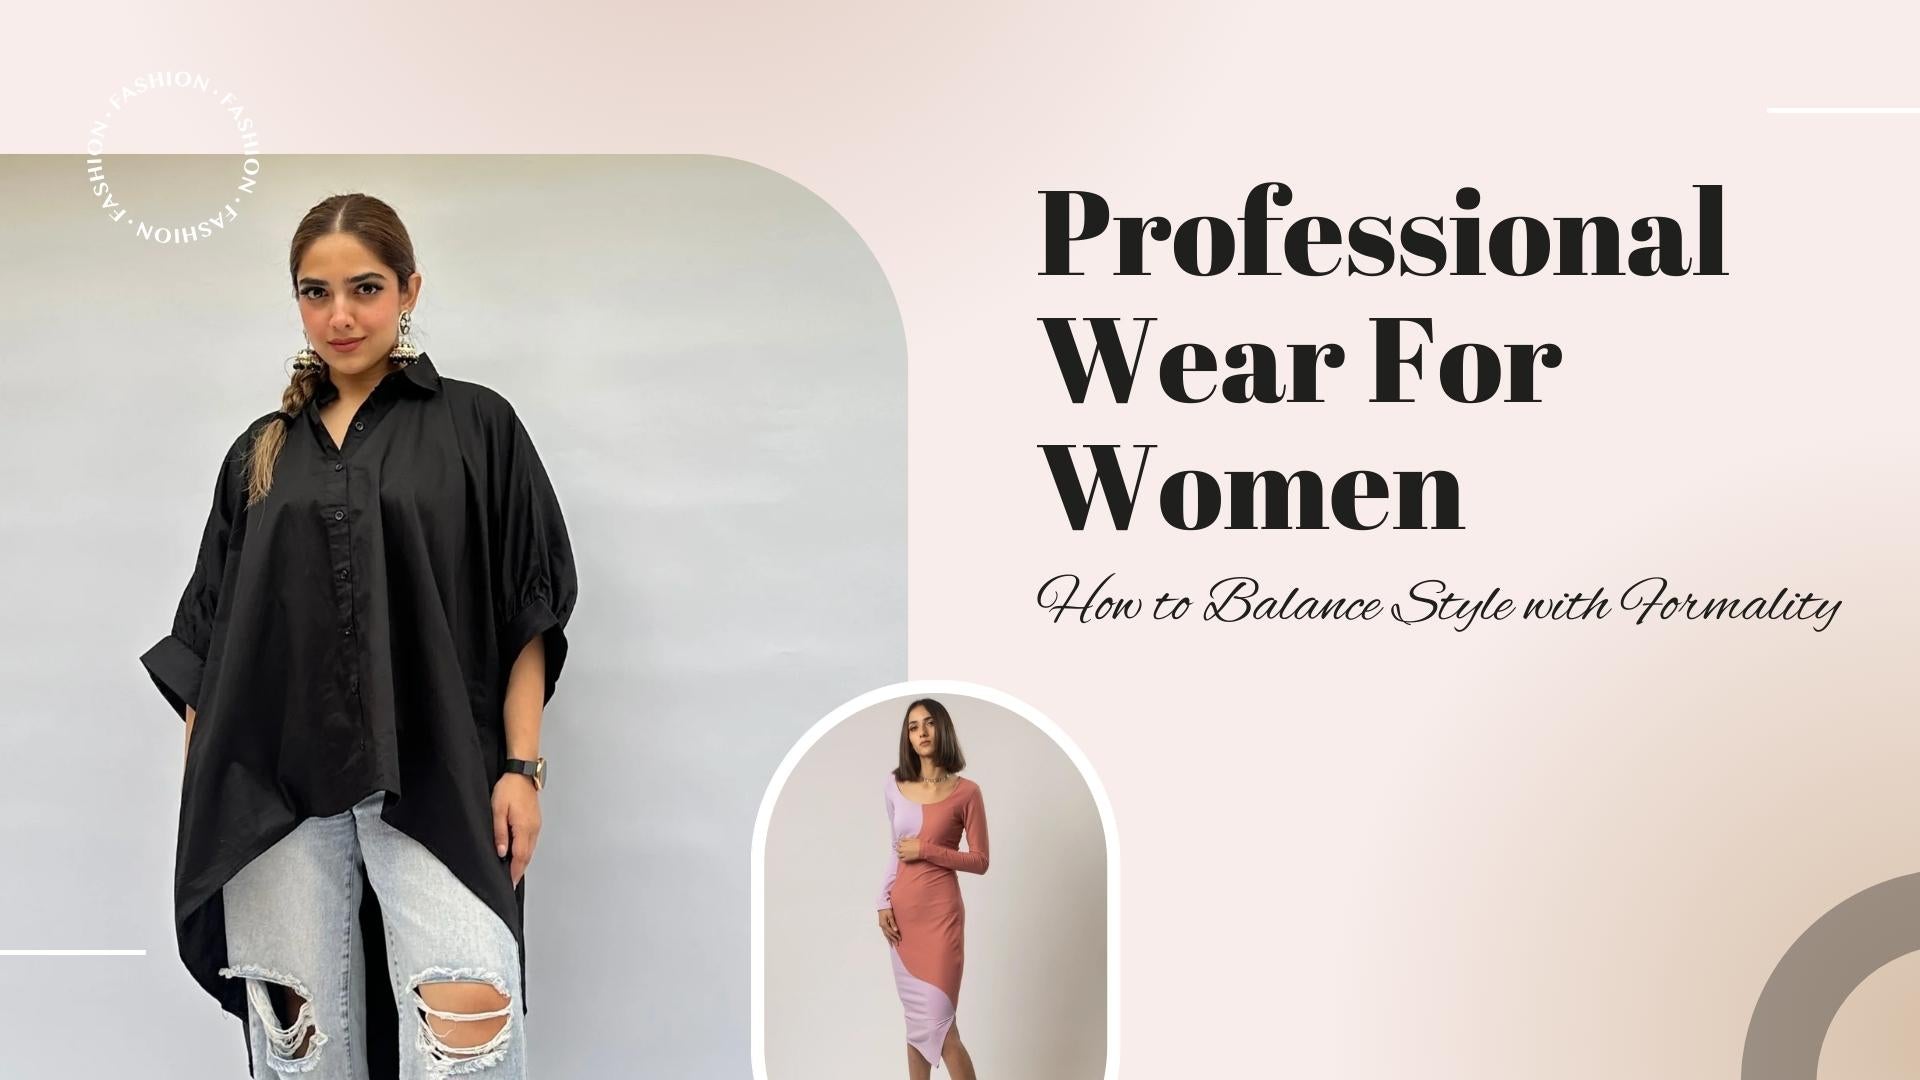 Business attire for women - dressing professional